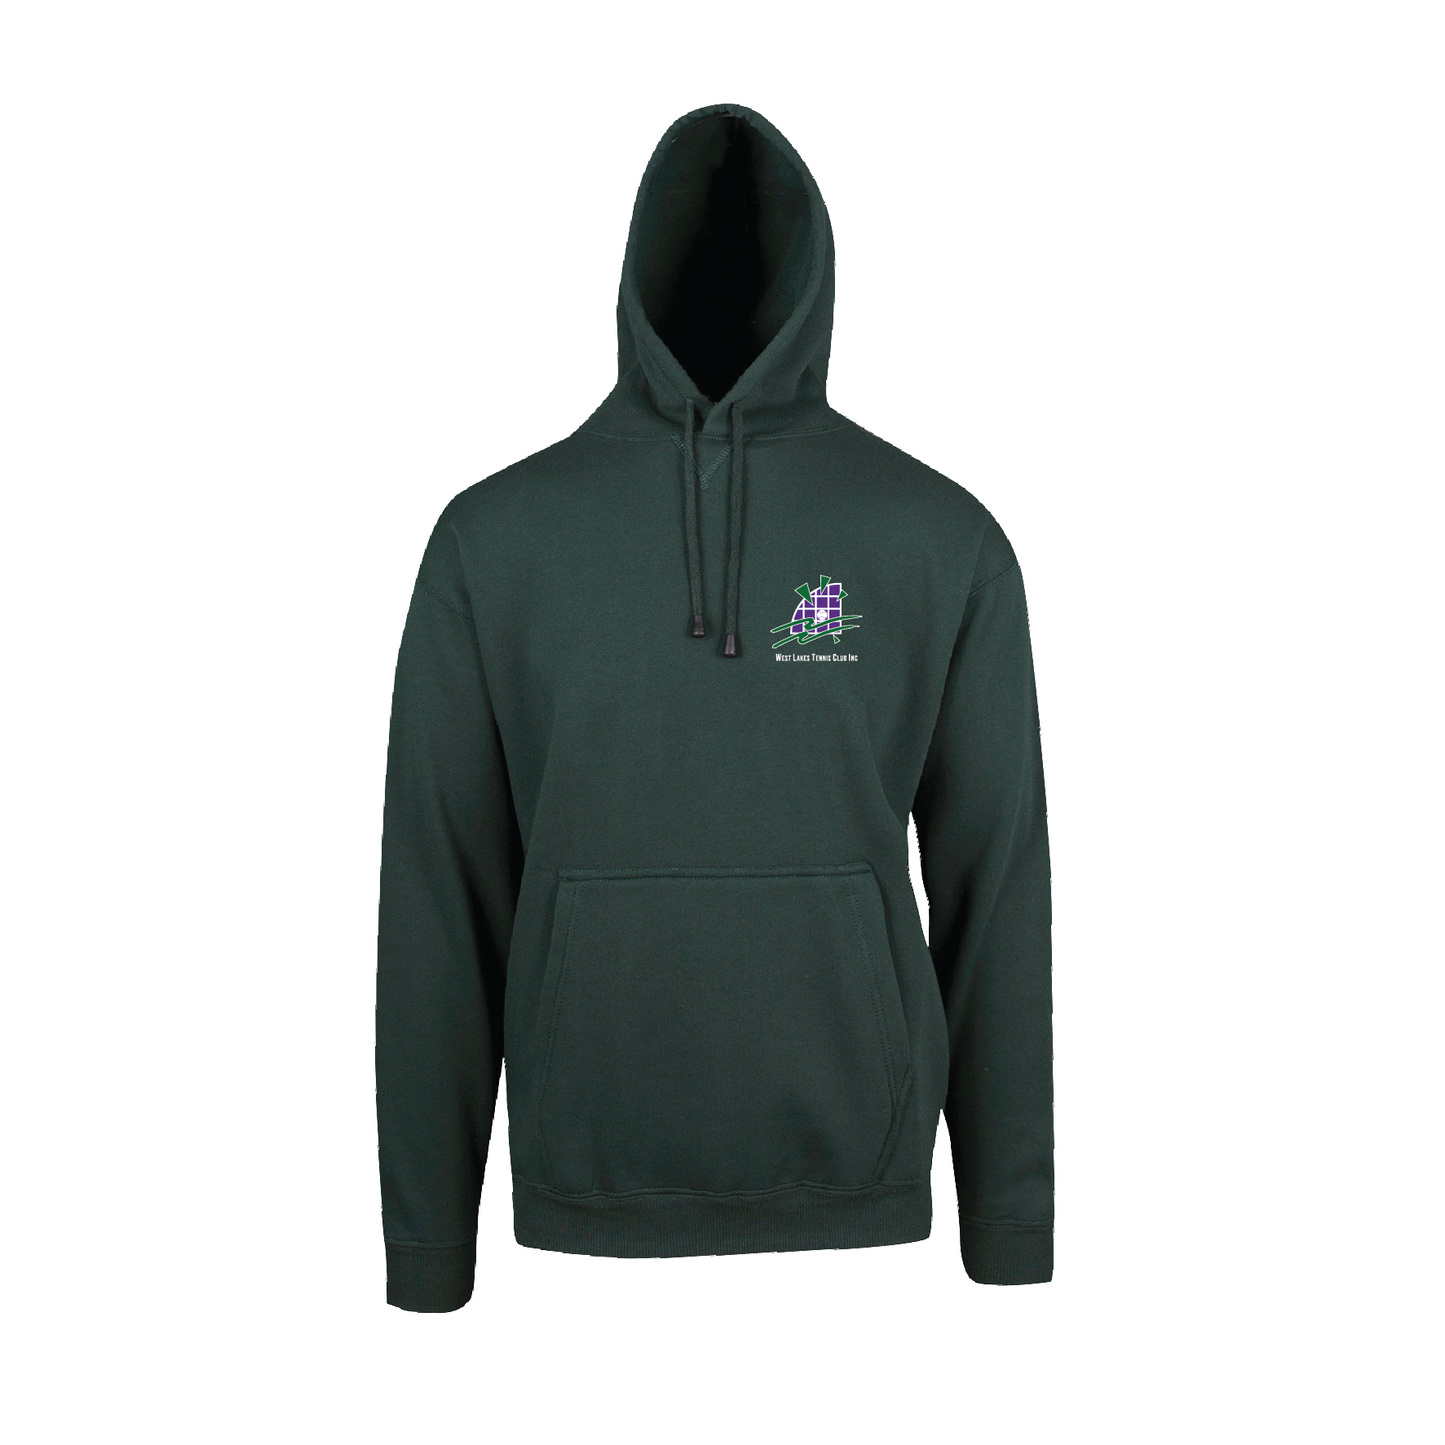 WEST LAKES TENNIS CLUB HOODED SWEAT - GREEN